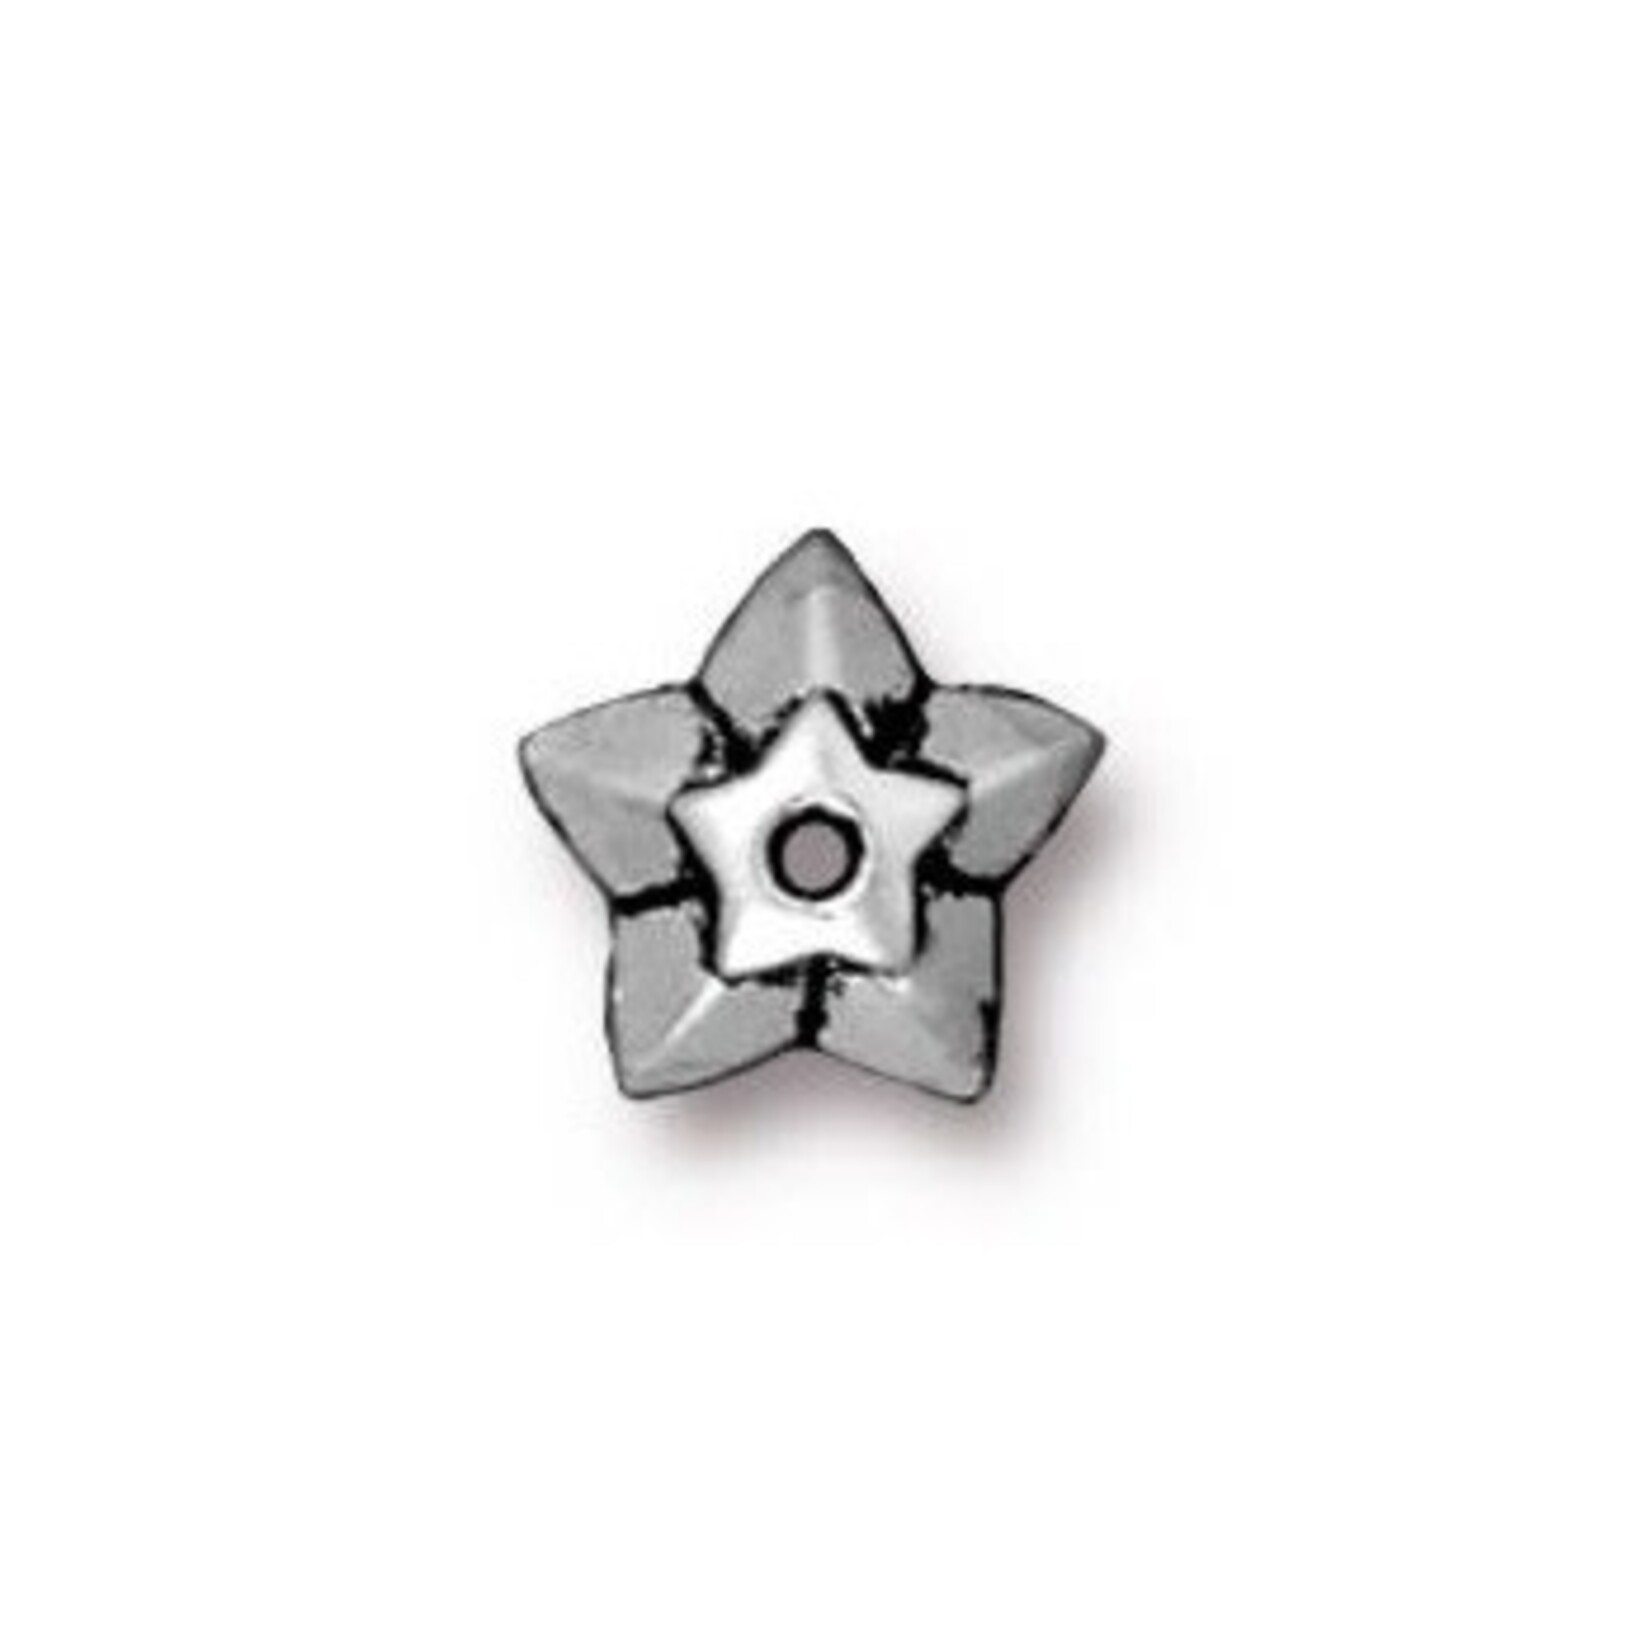 TierraCast Star Bead Cap - Antique Silver Plated